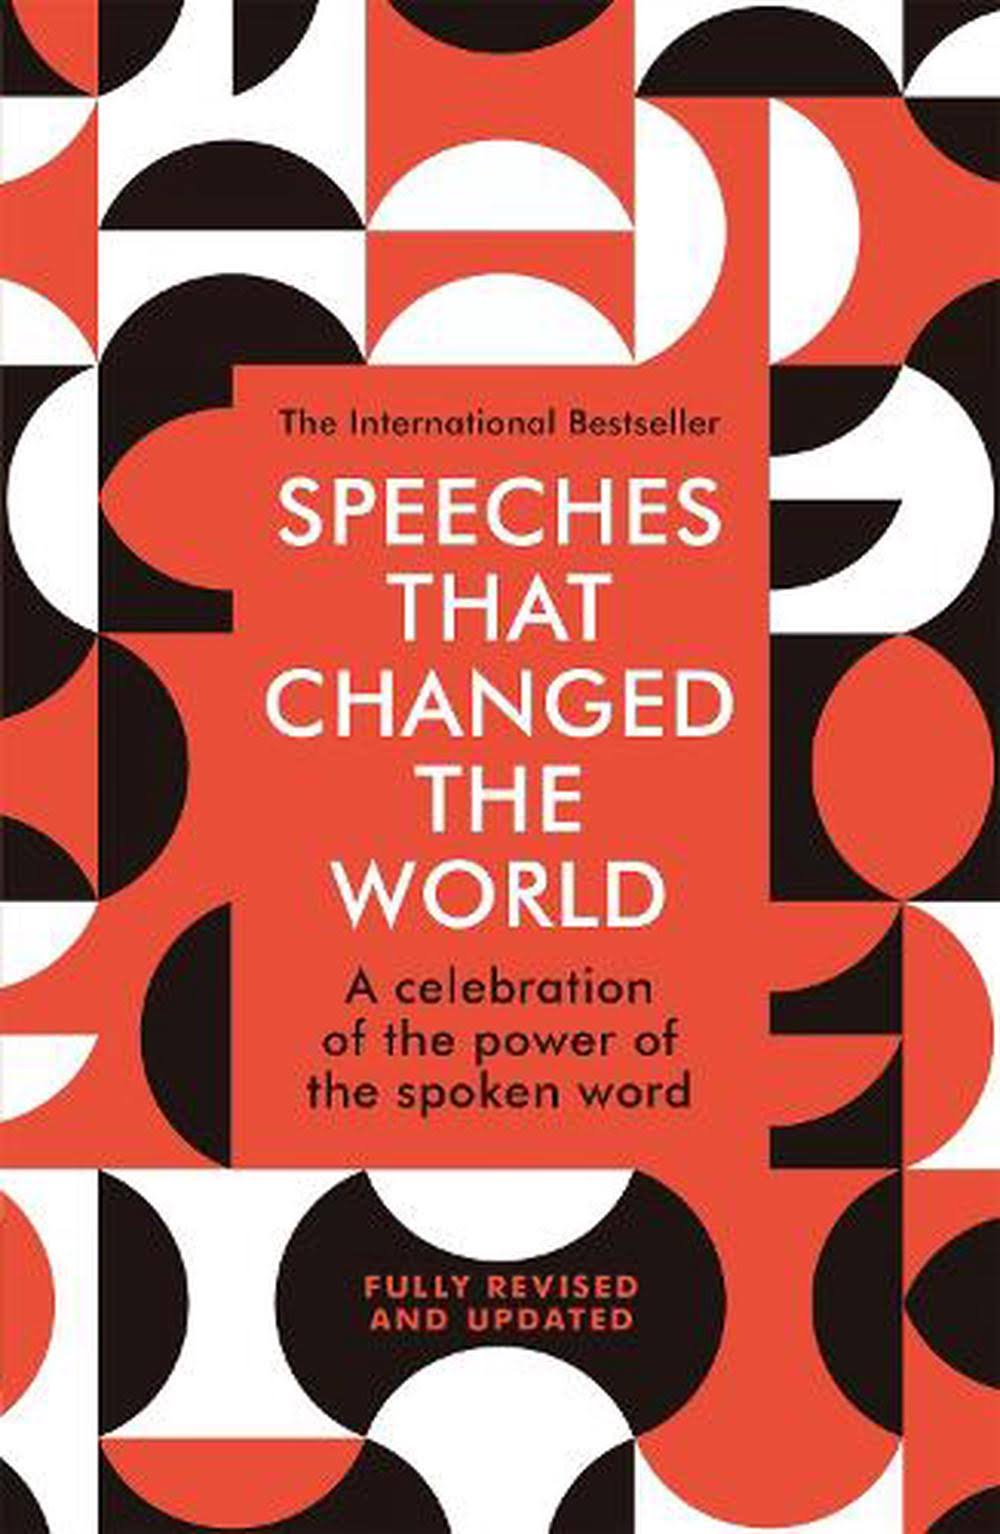 Speeches That Changed the World [Book]